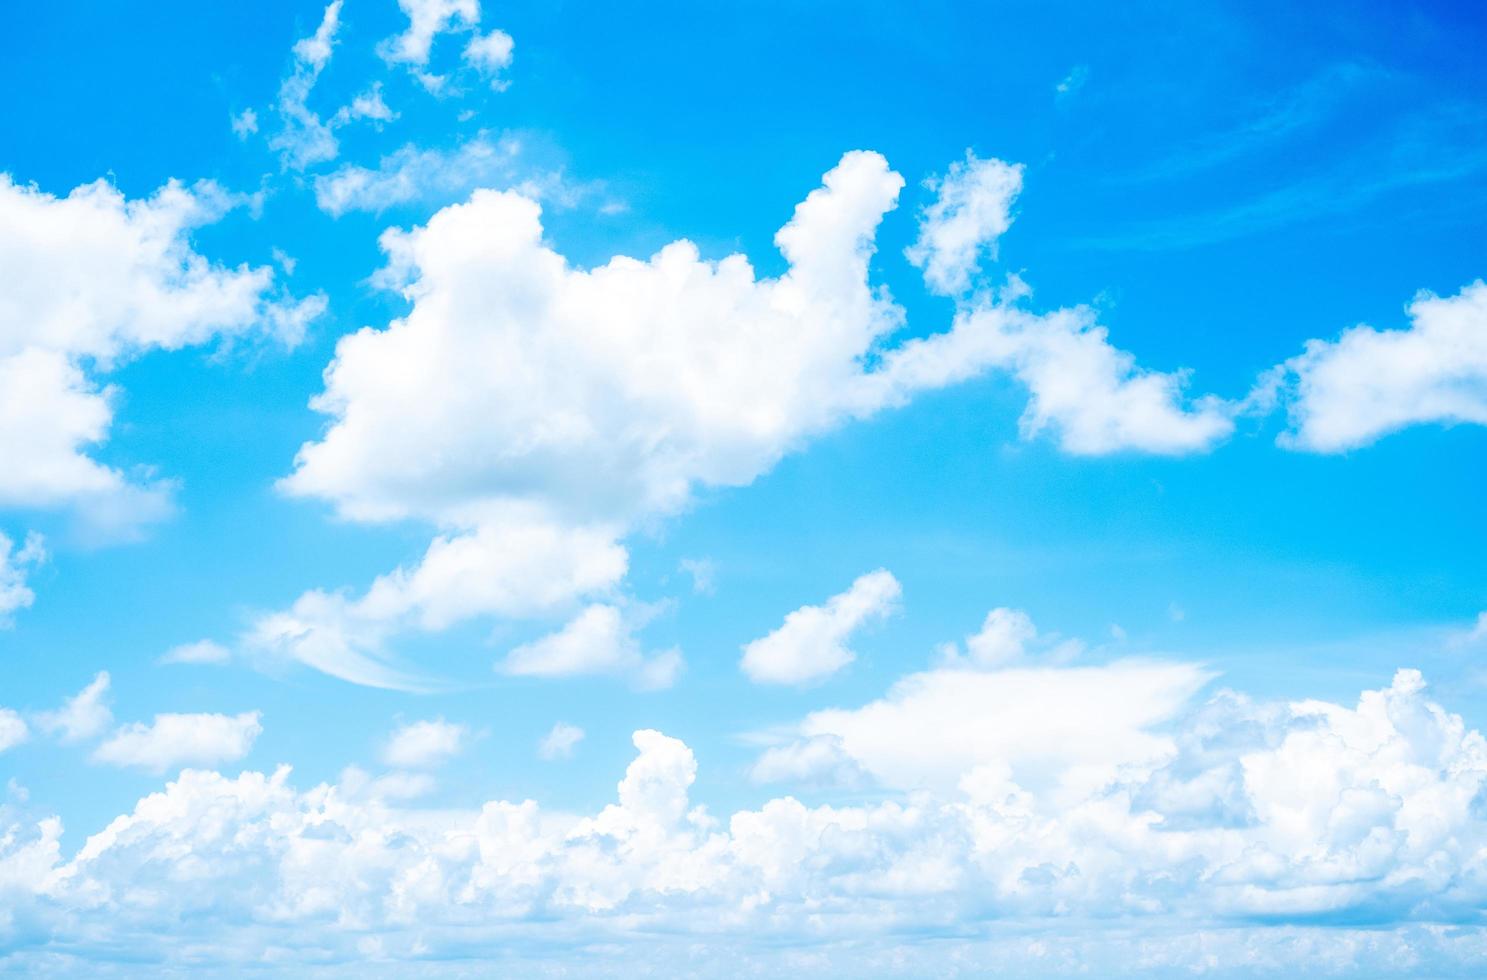 beautiful soft white clouds on the blue sky perfect for the background,rainy season photo